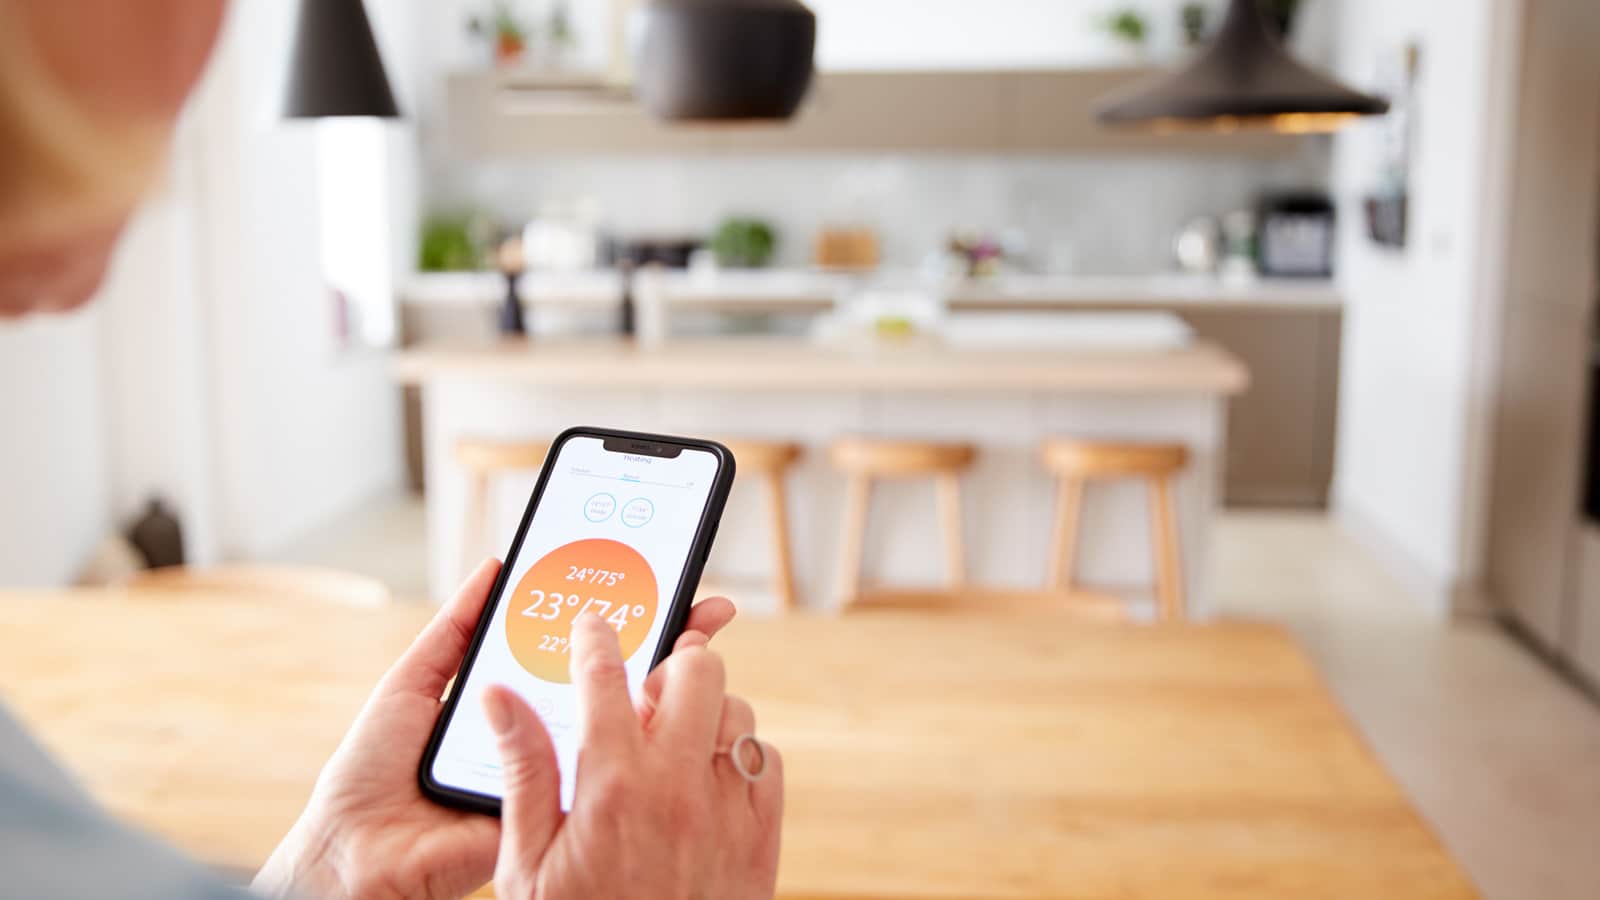 New apps and smart thermostats allow you to control your home's comfort from anywhere: your couch, your car, or your vacation home!